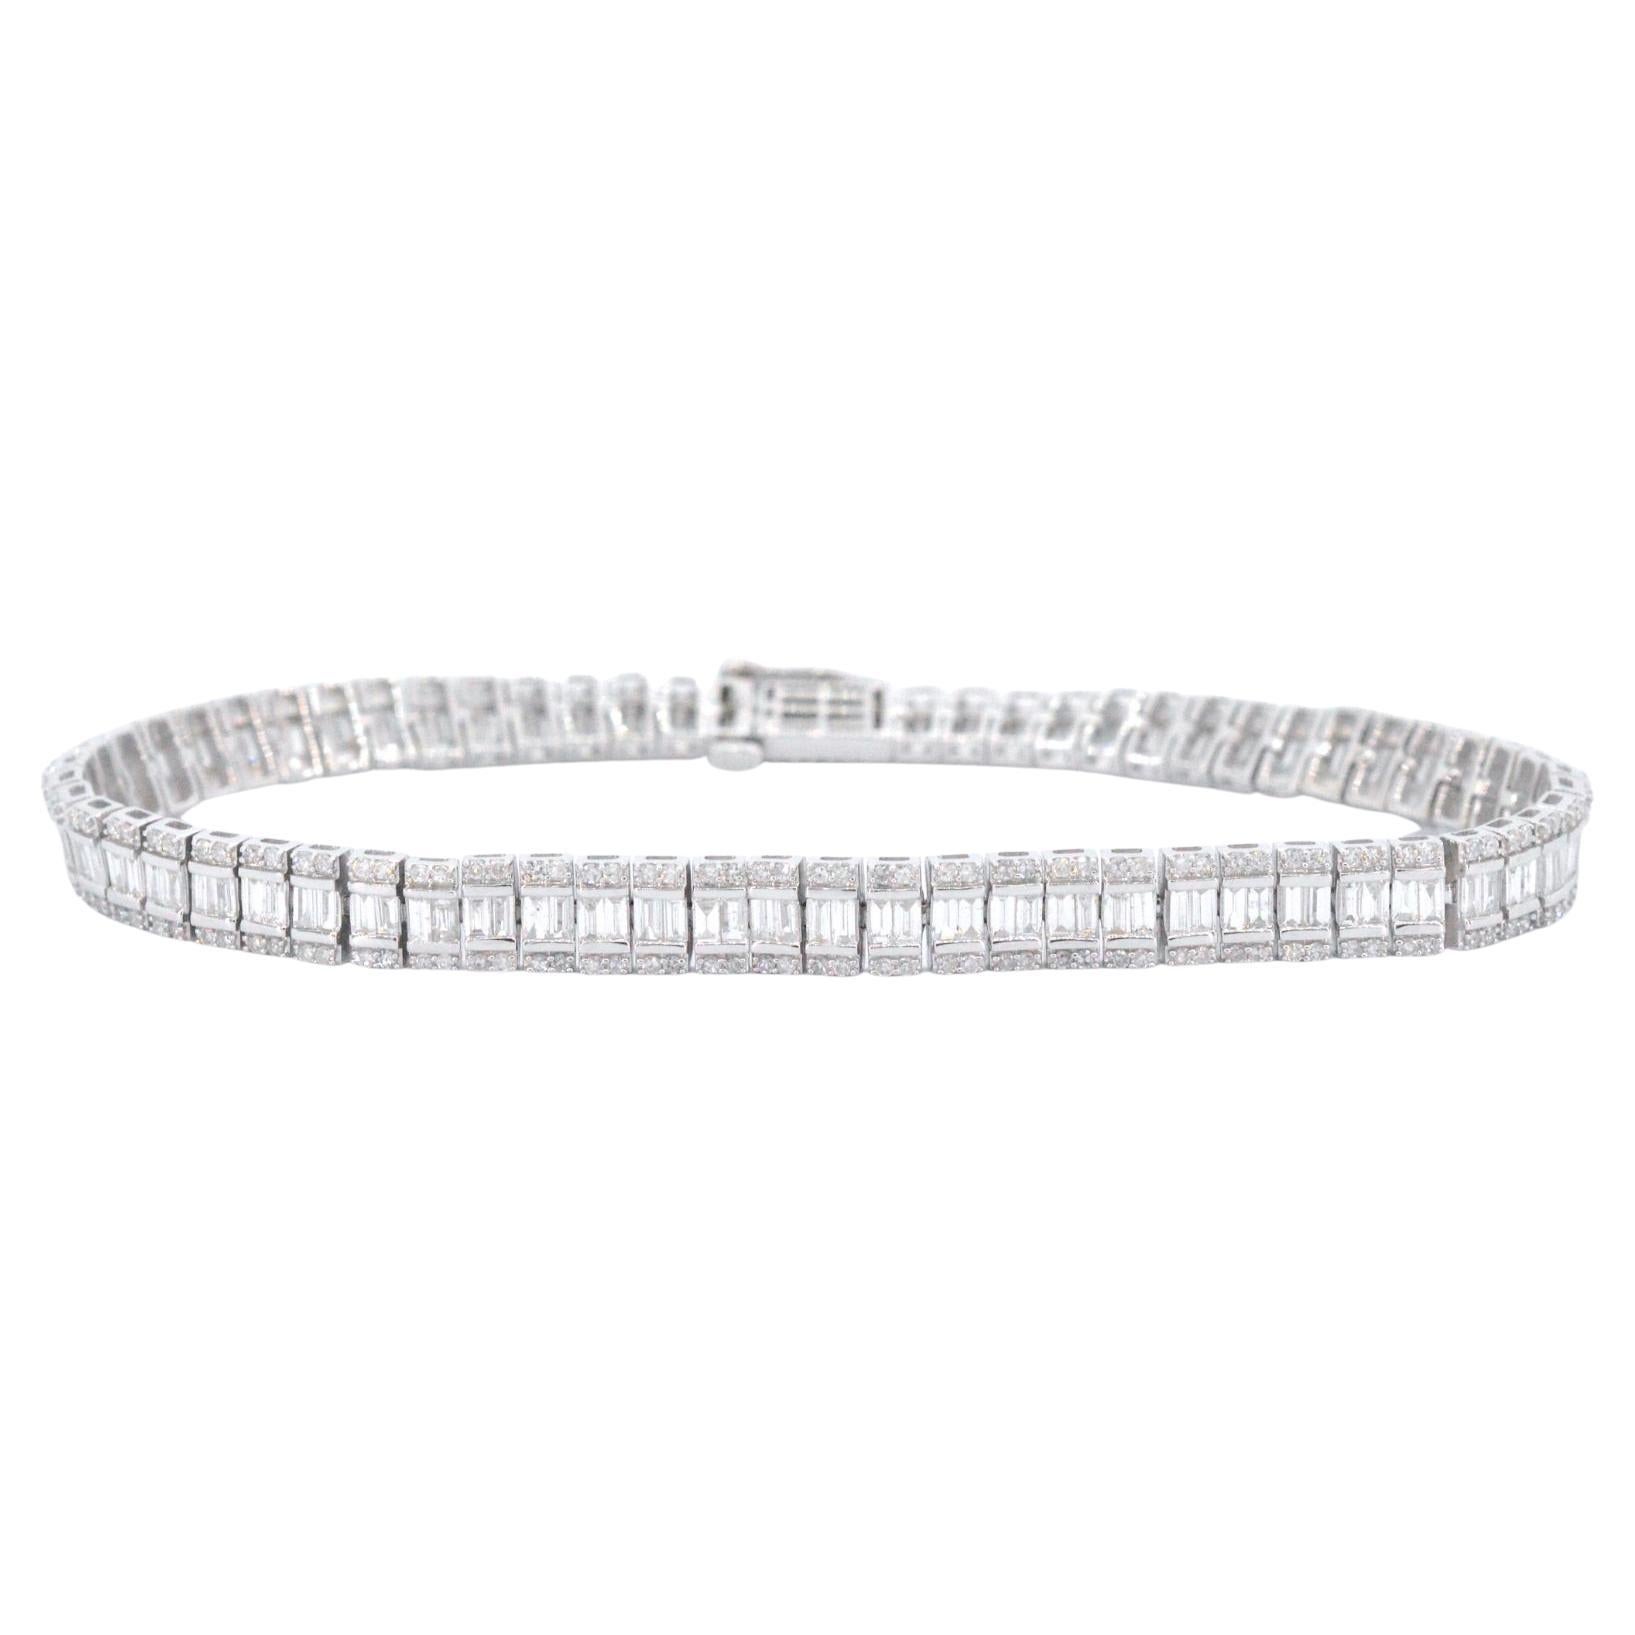 White Gold Bracelet with Fully Set with Diamonds 4.50 Carat